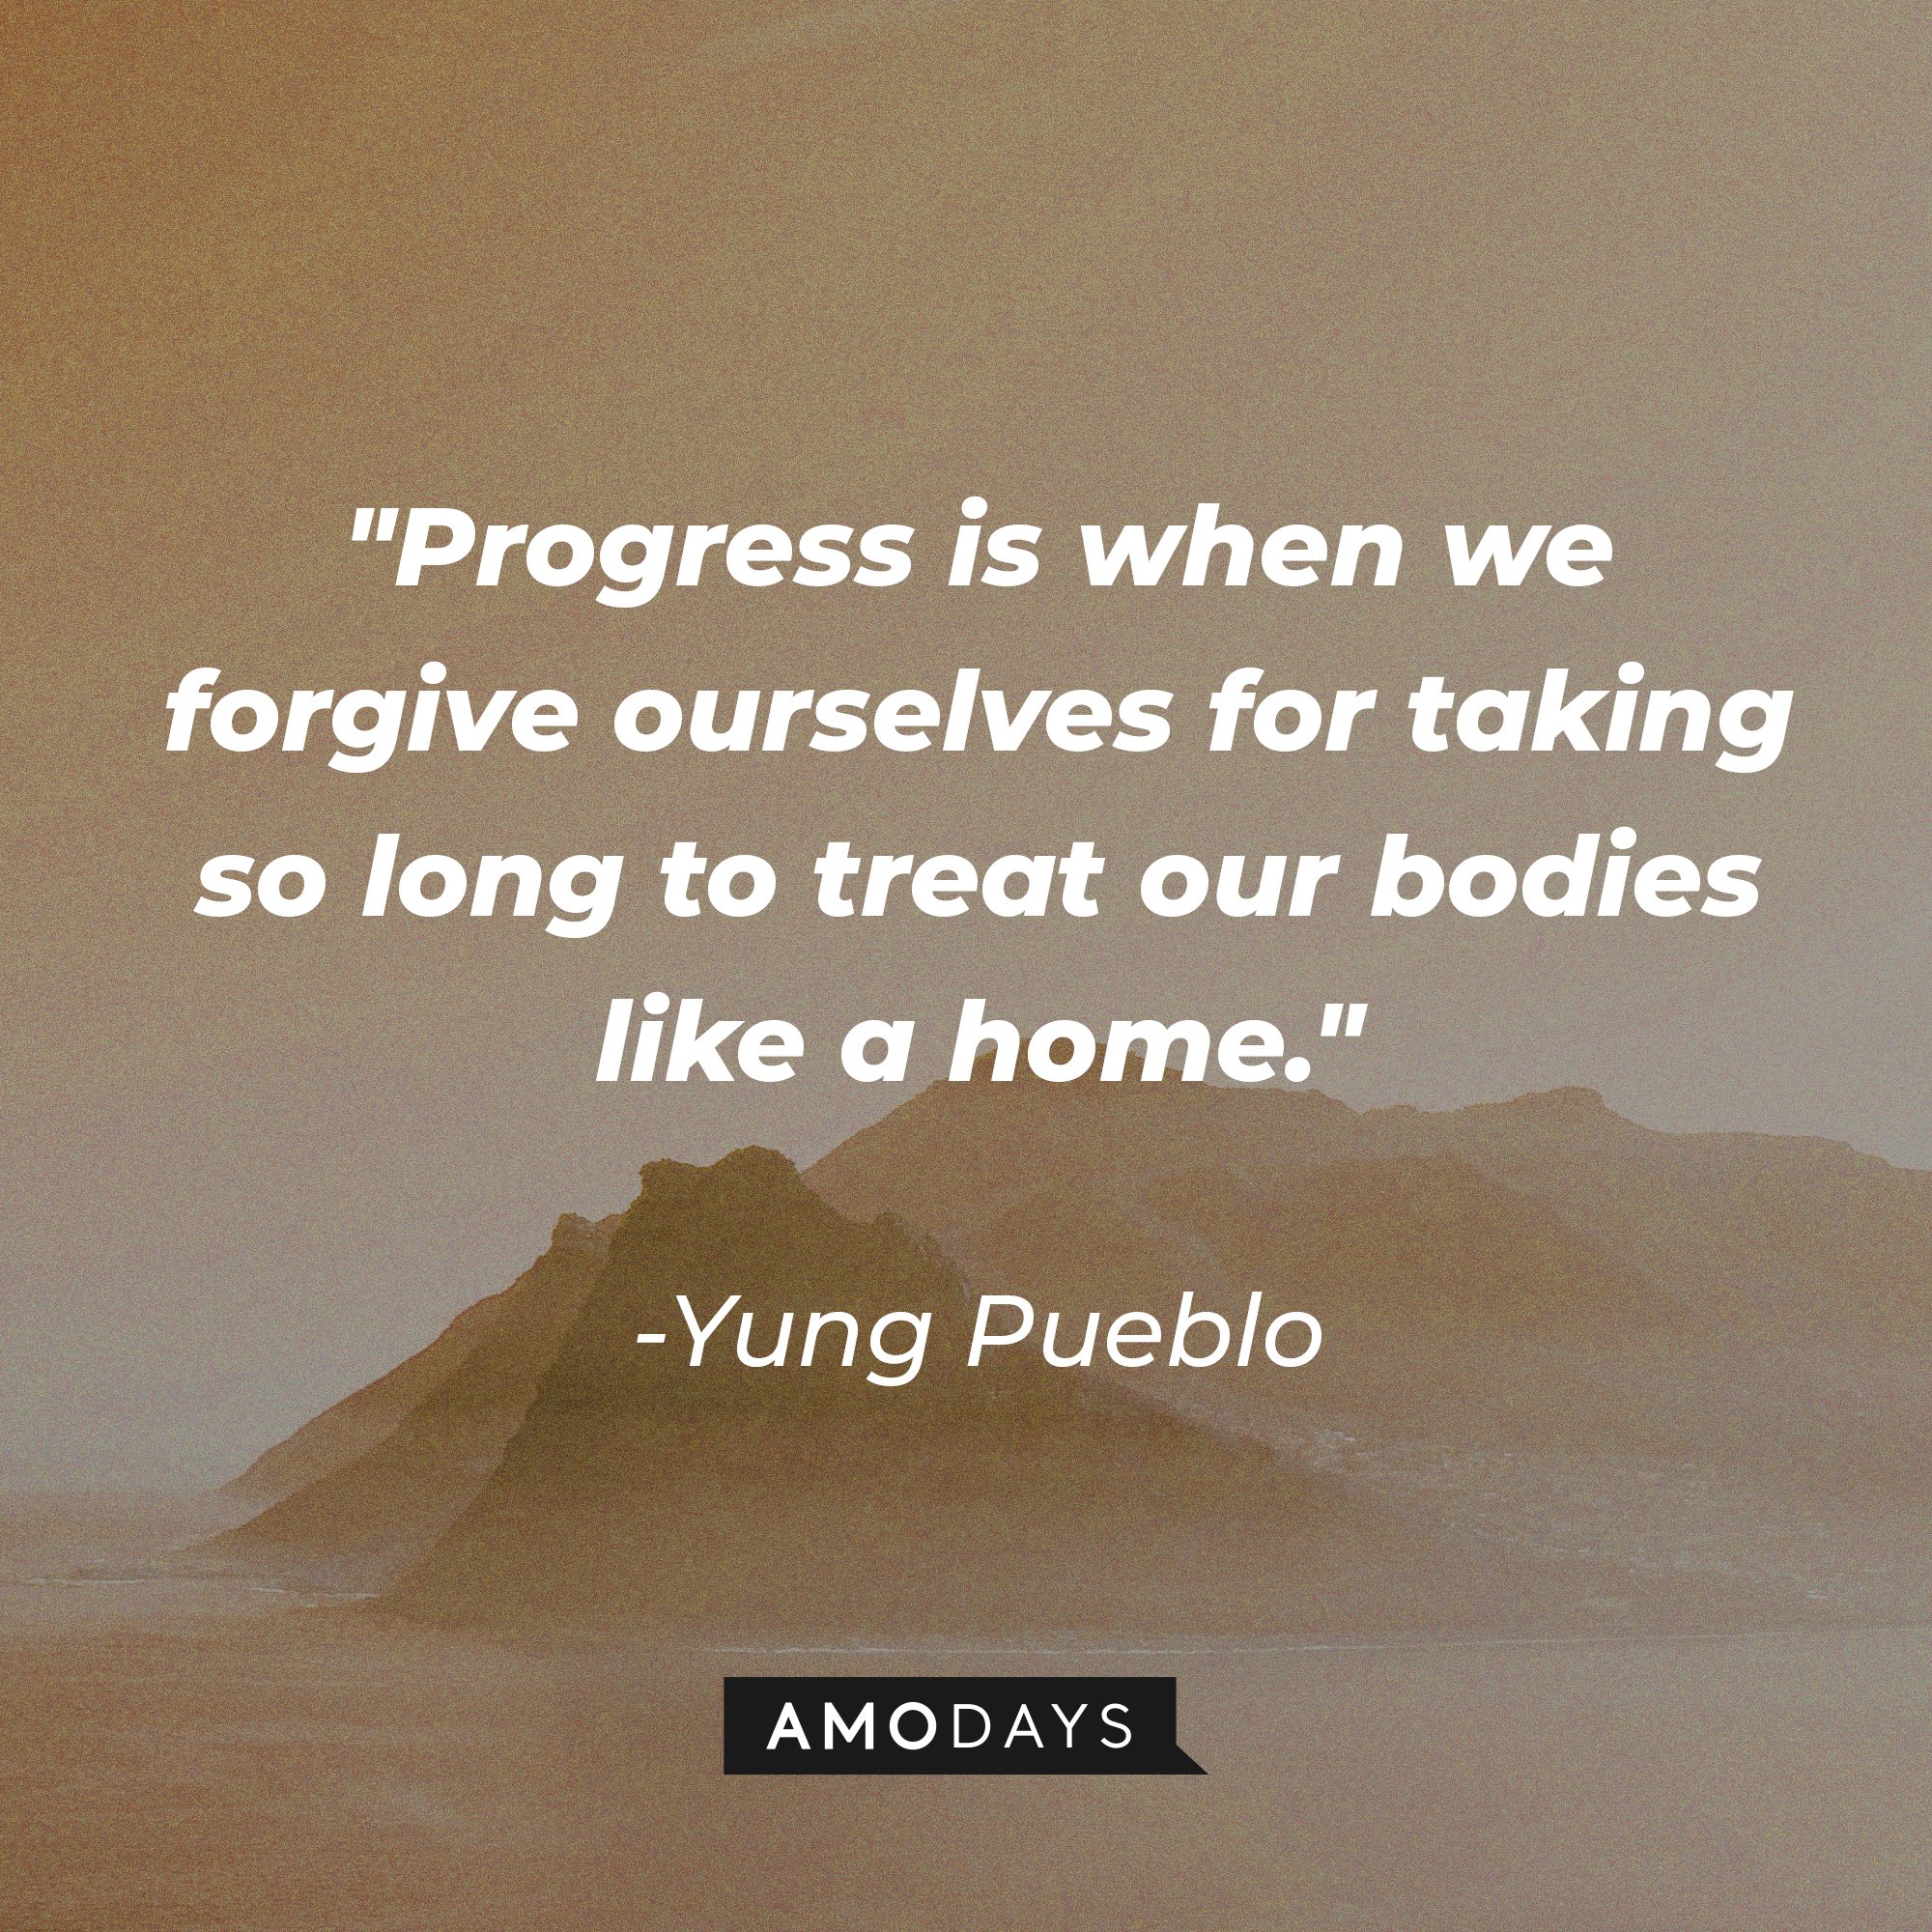 Yung Pueblo's quote "Progress is when we forgive ourselves for taking so long to treat our bodies like a home." | Source| Unsplash.com